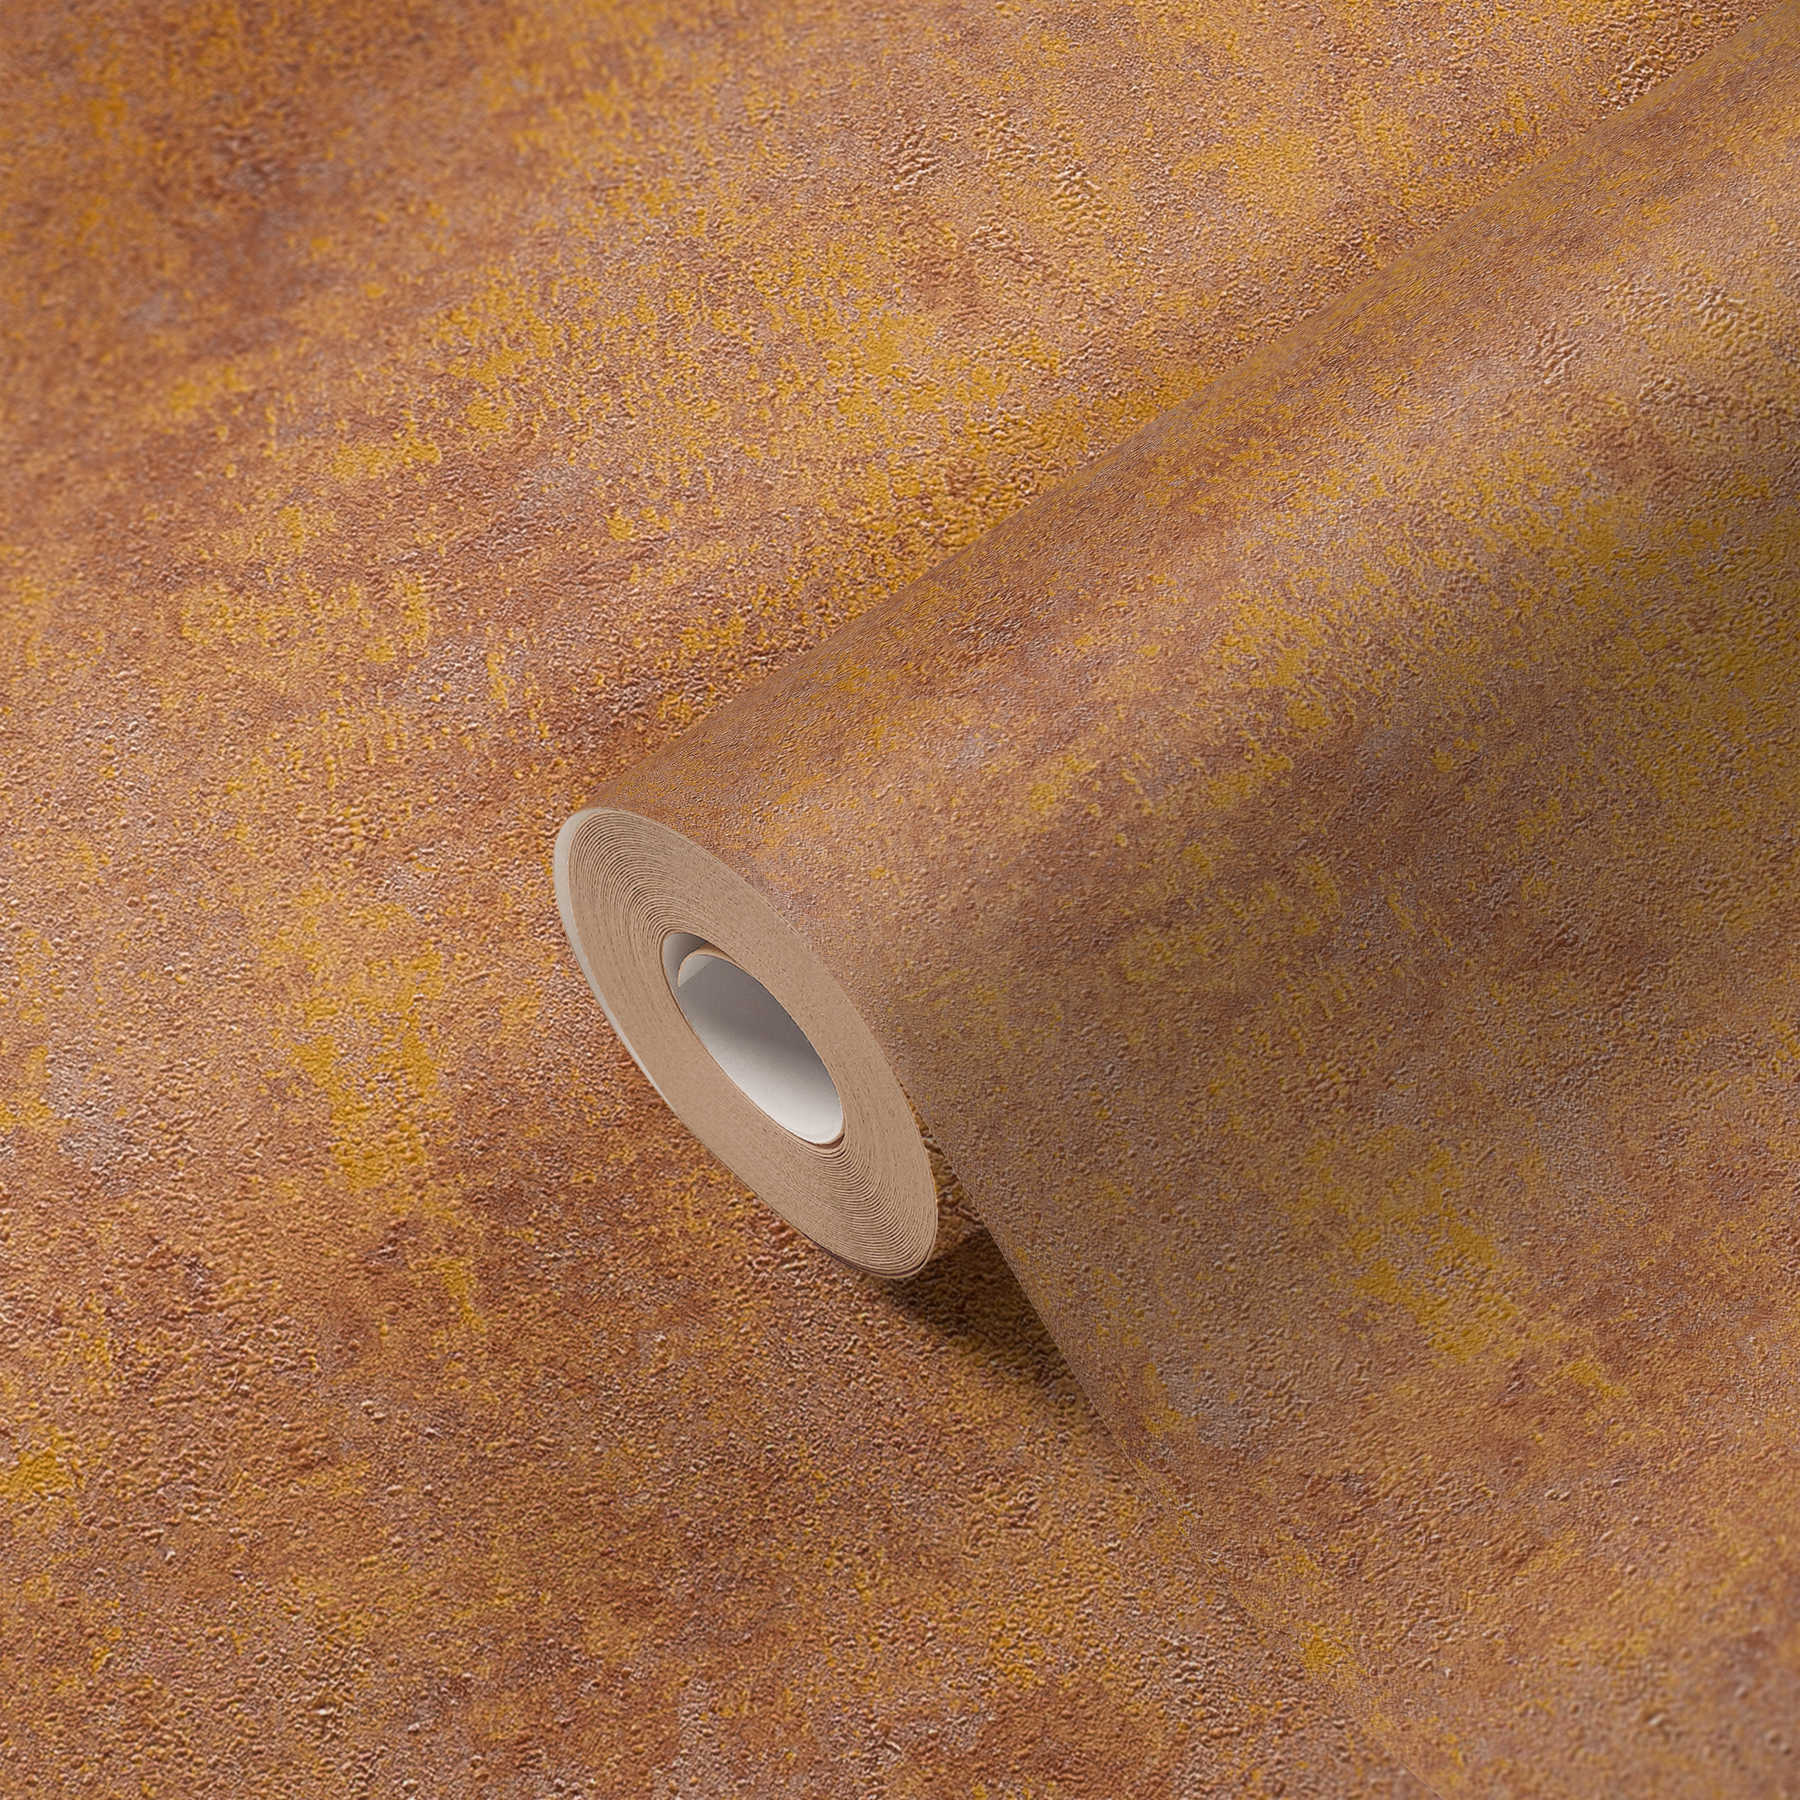             Non-woven wallpaper rust look with gloss effect - orange, copper, brown
        